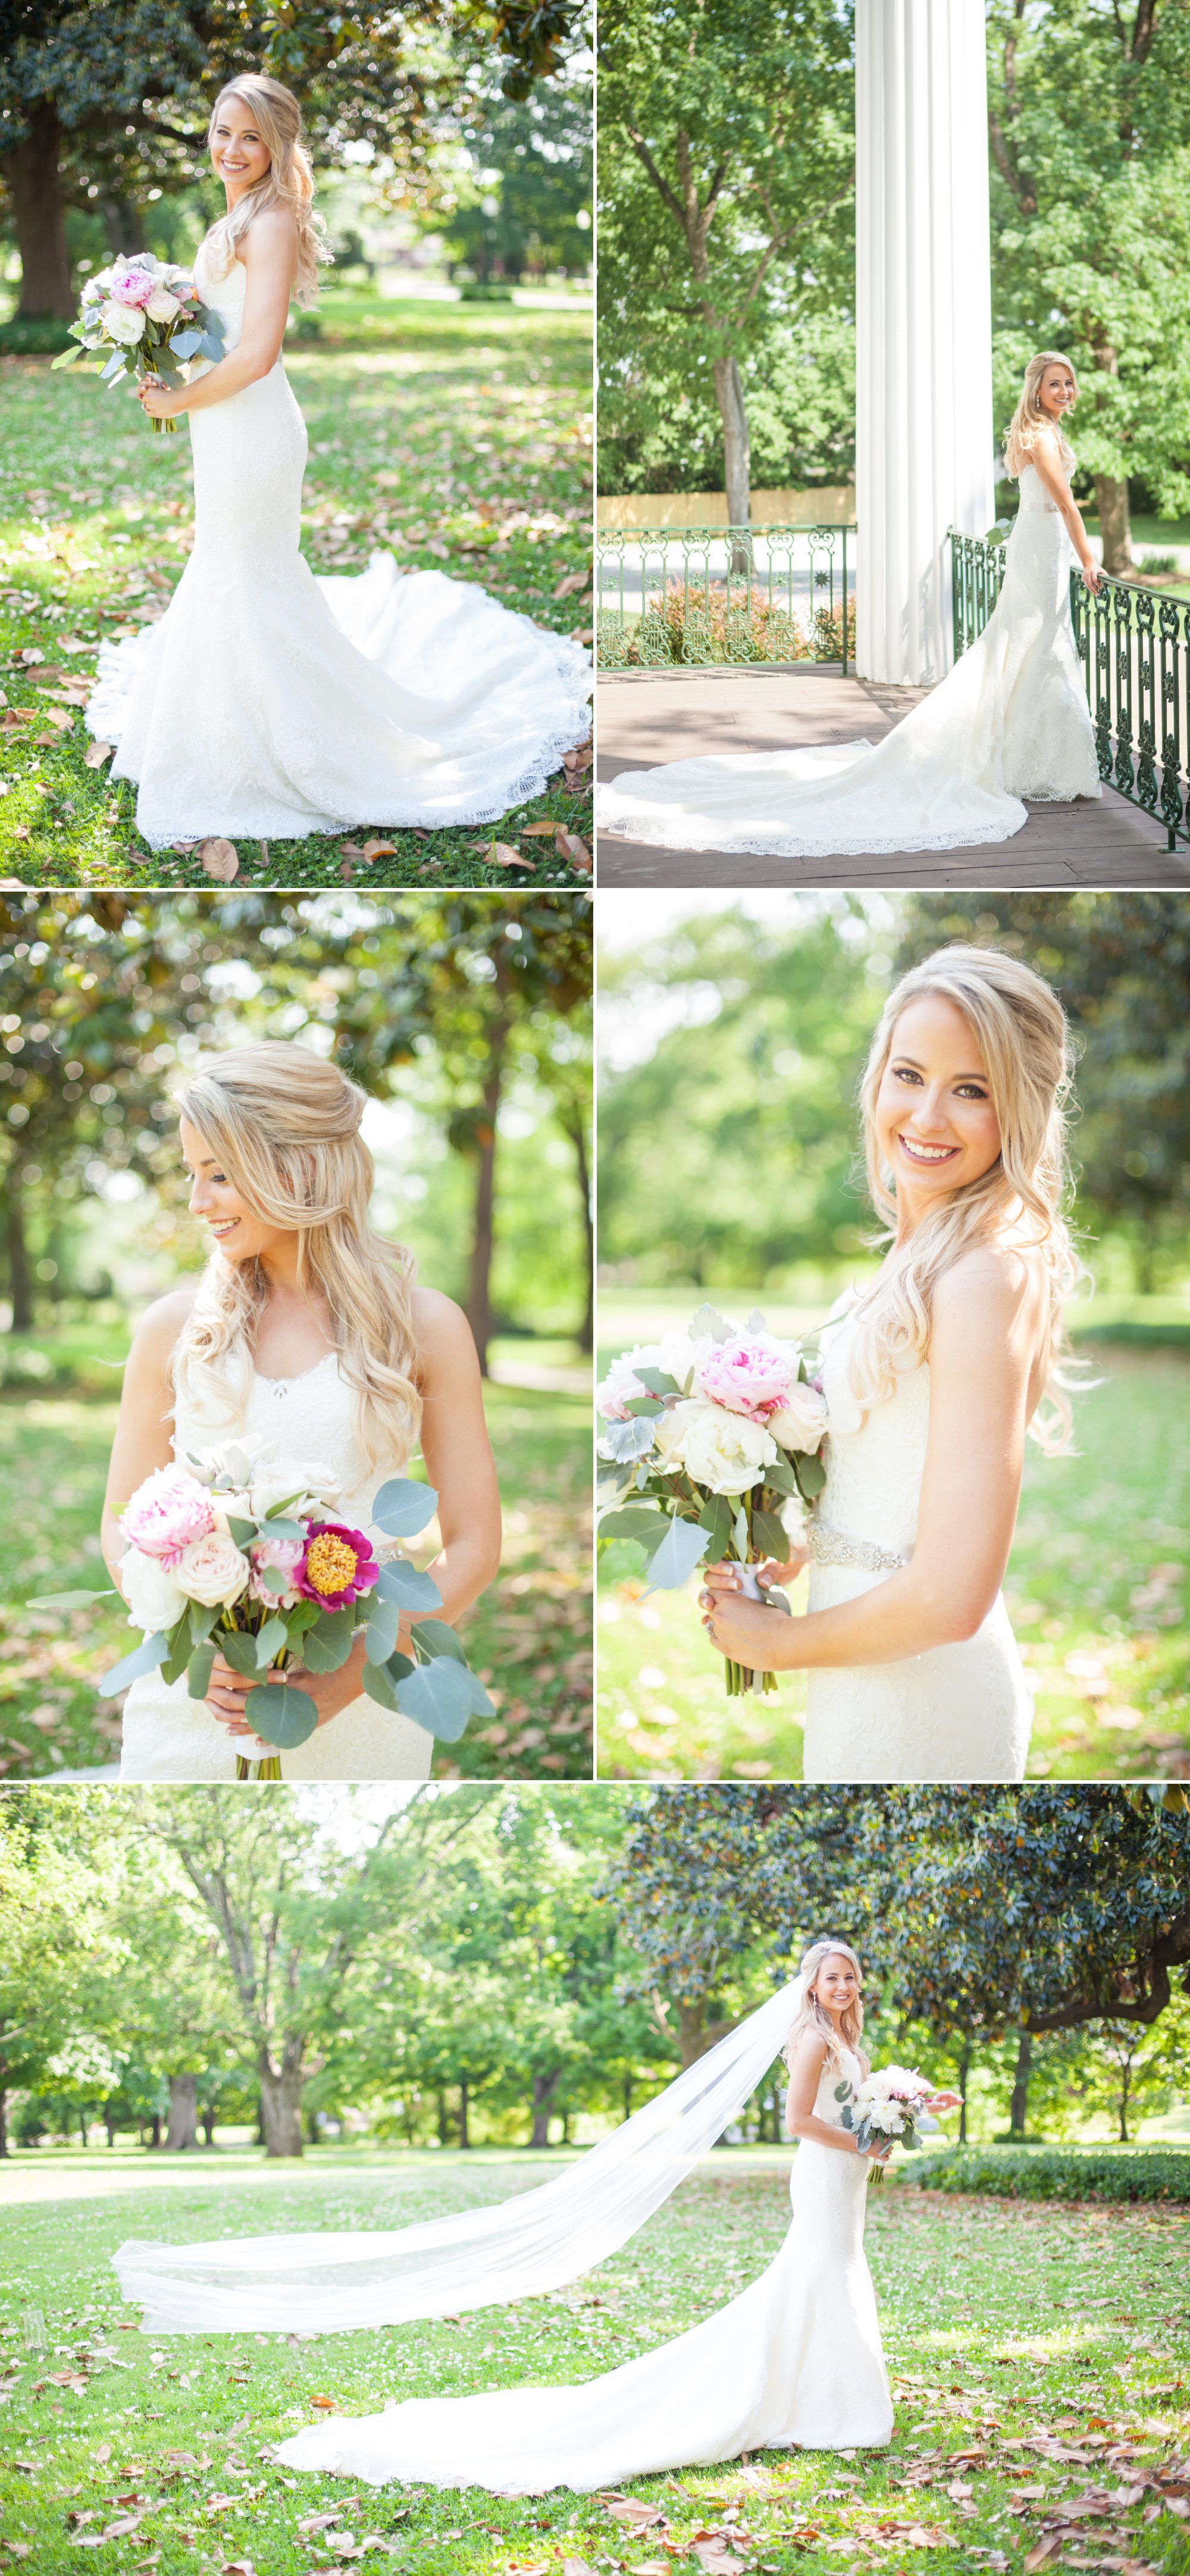 Bride does photos before wedding ceremony at Riverwood Mansion in Nashville, Tennessee. Photography by Krista Lee.